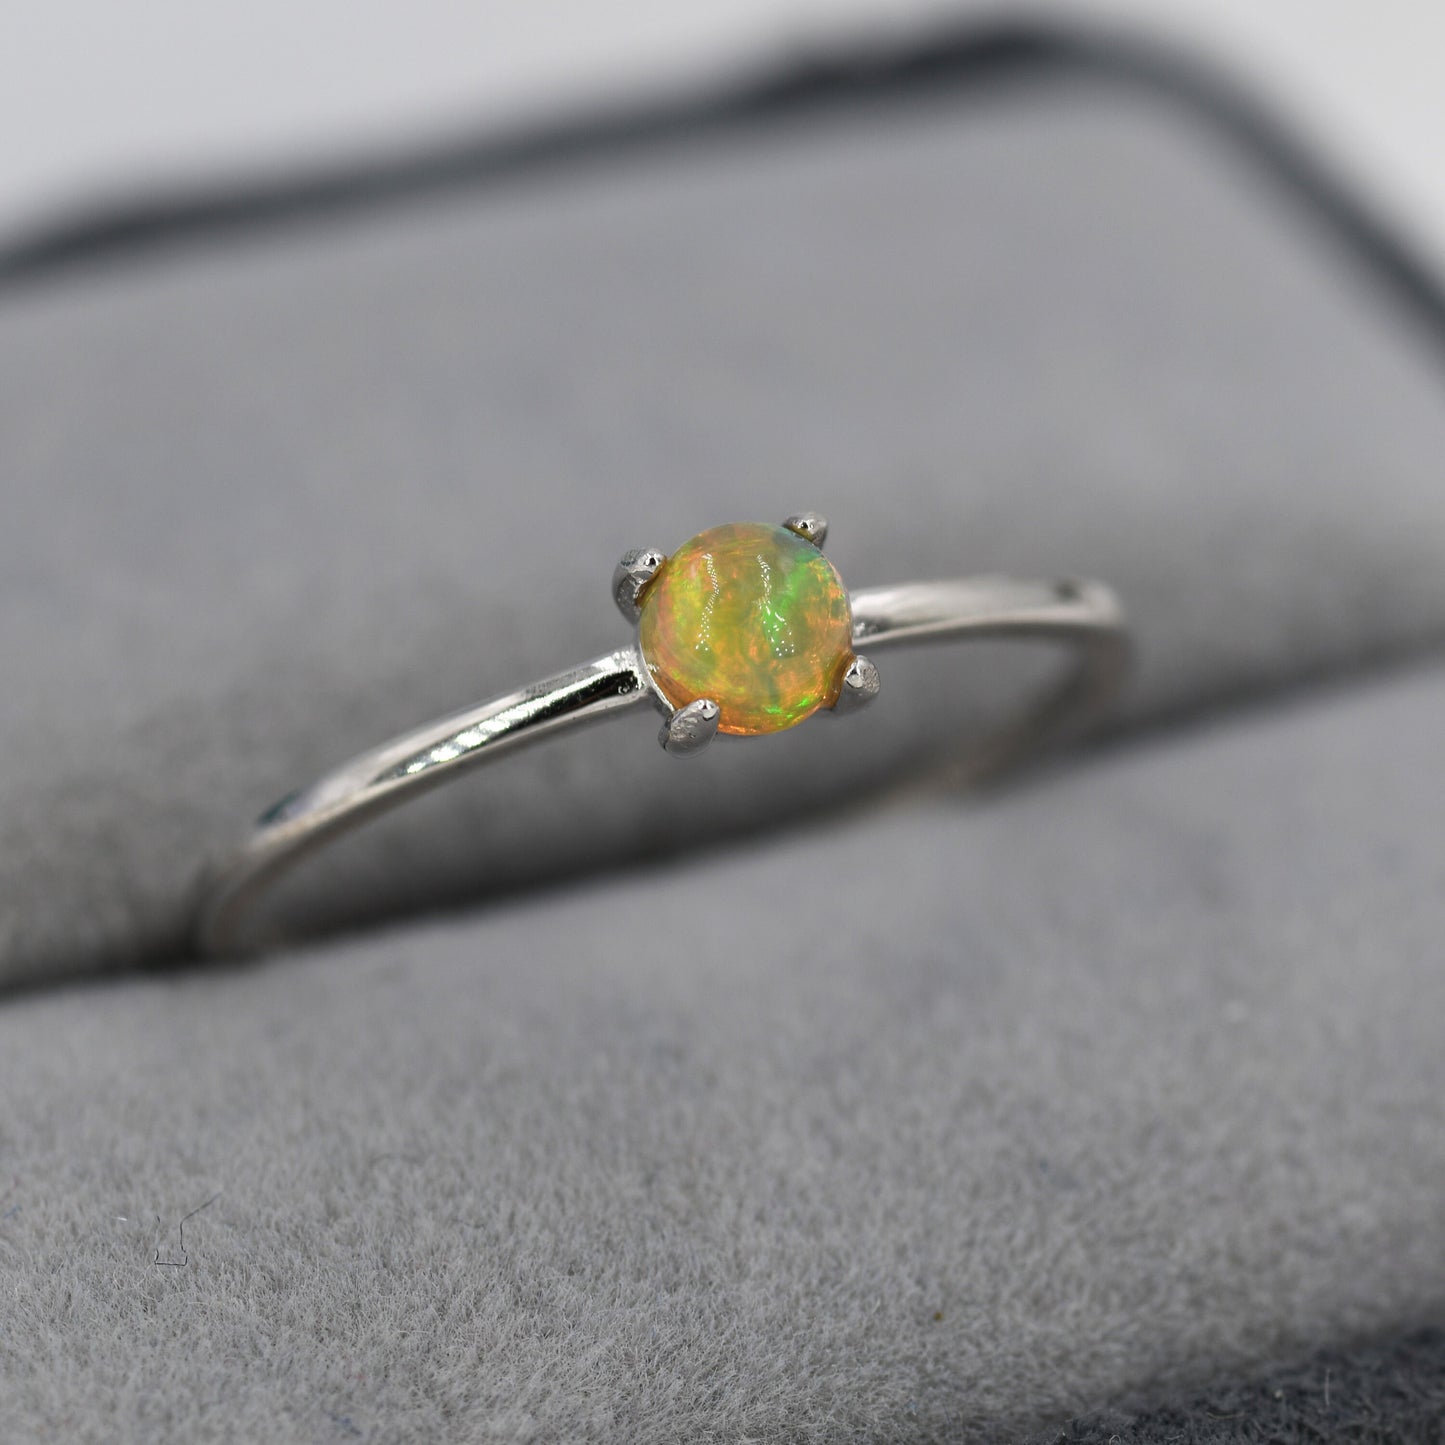 Genuine Opal Ring in Sterling Silver, US 5 - 8, Natural Opal Stone Ring, Ethiopian Opal